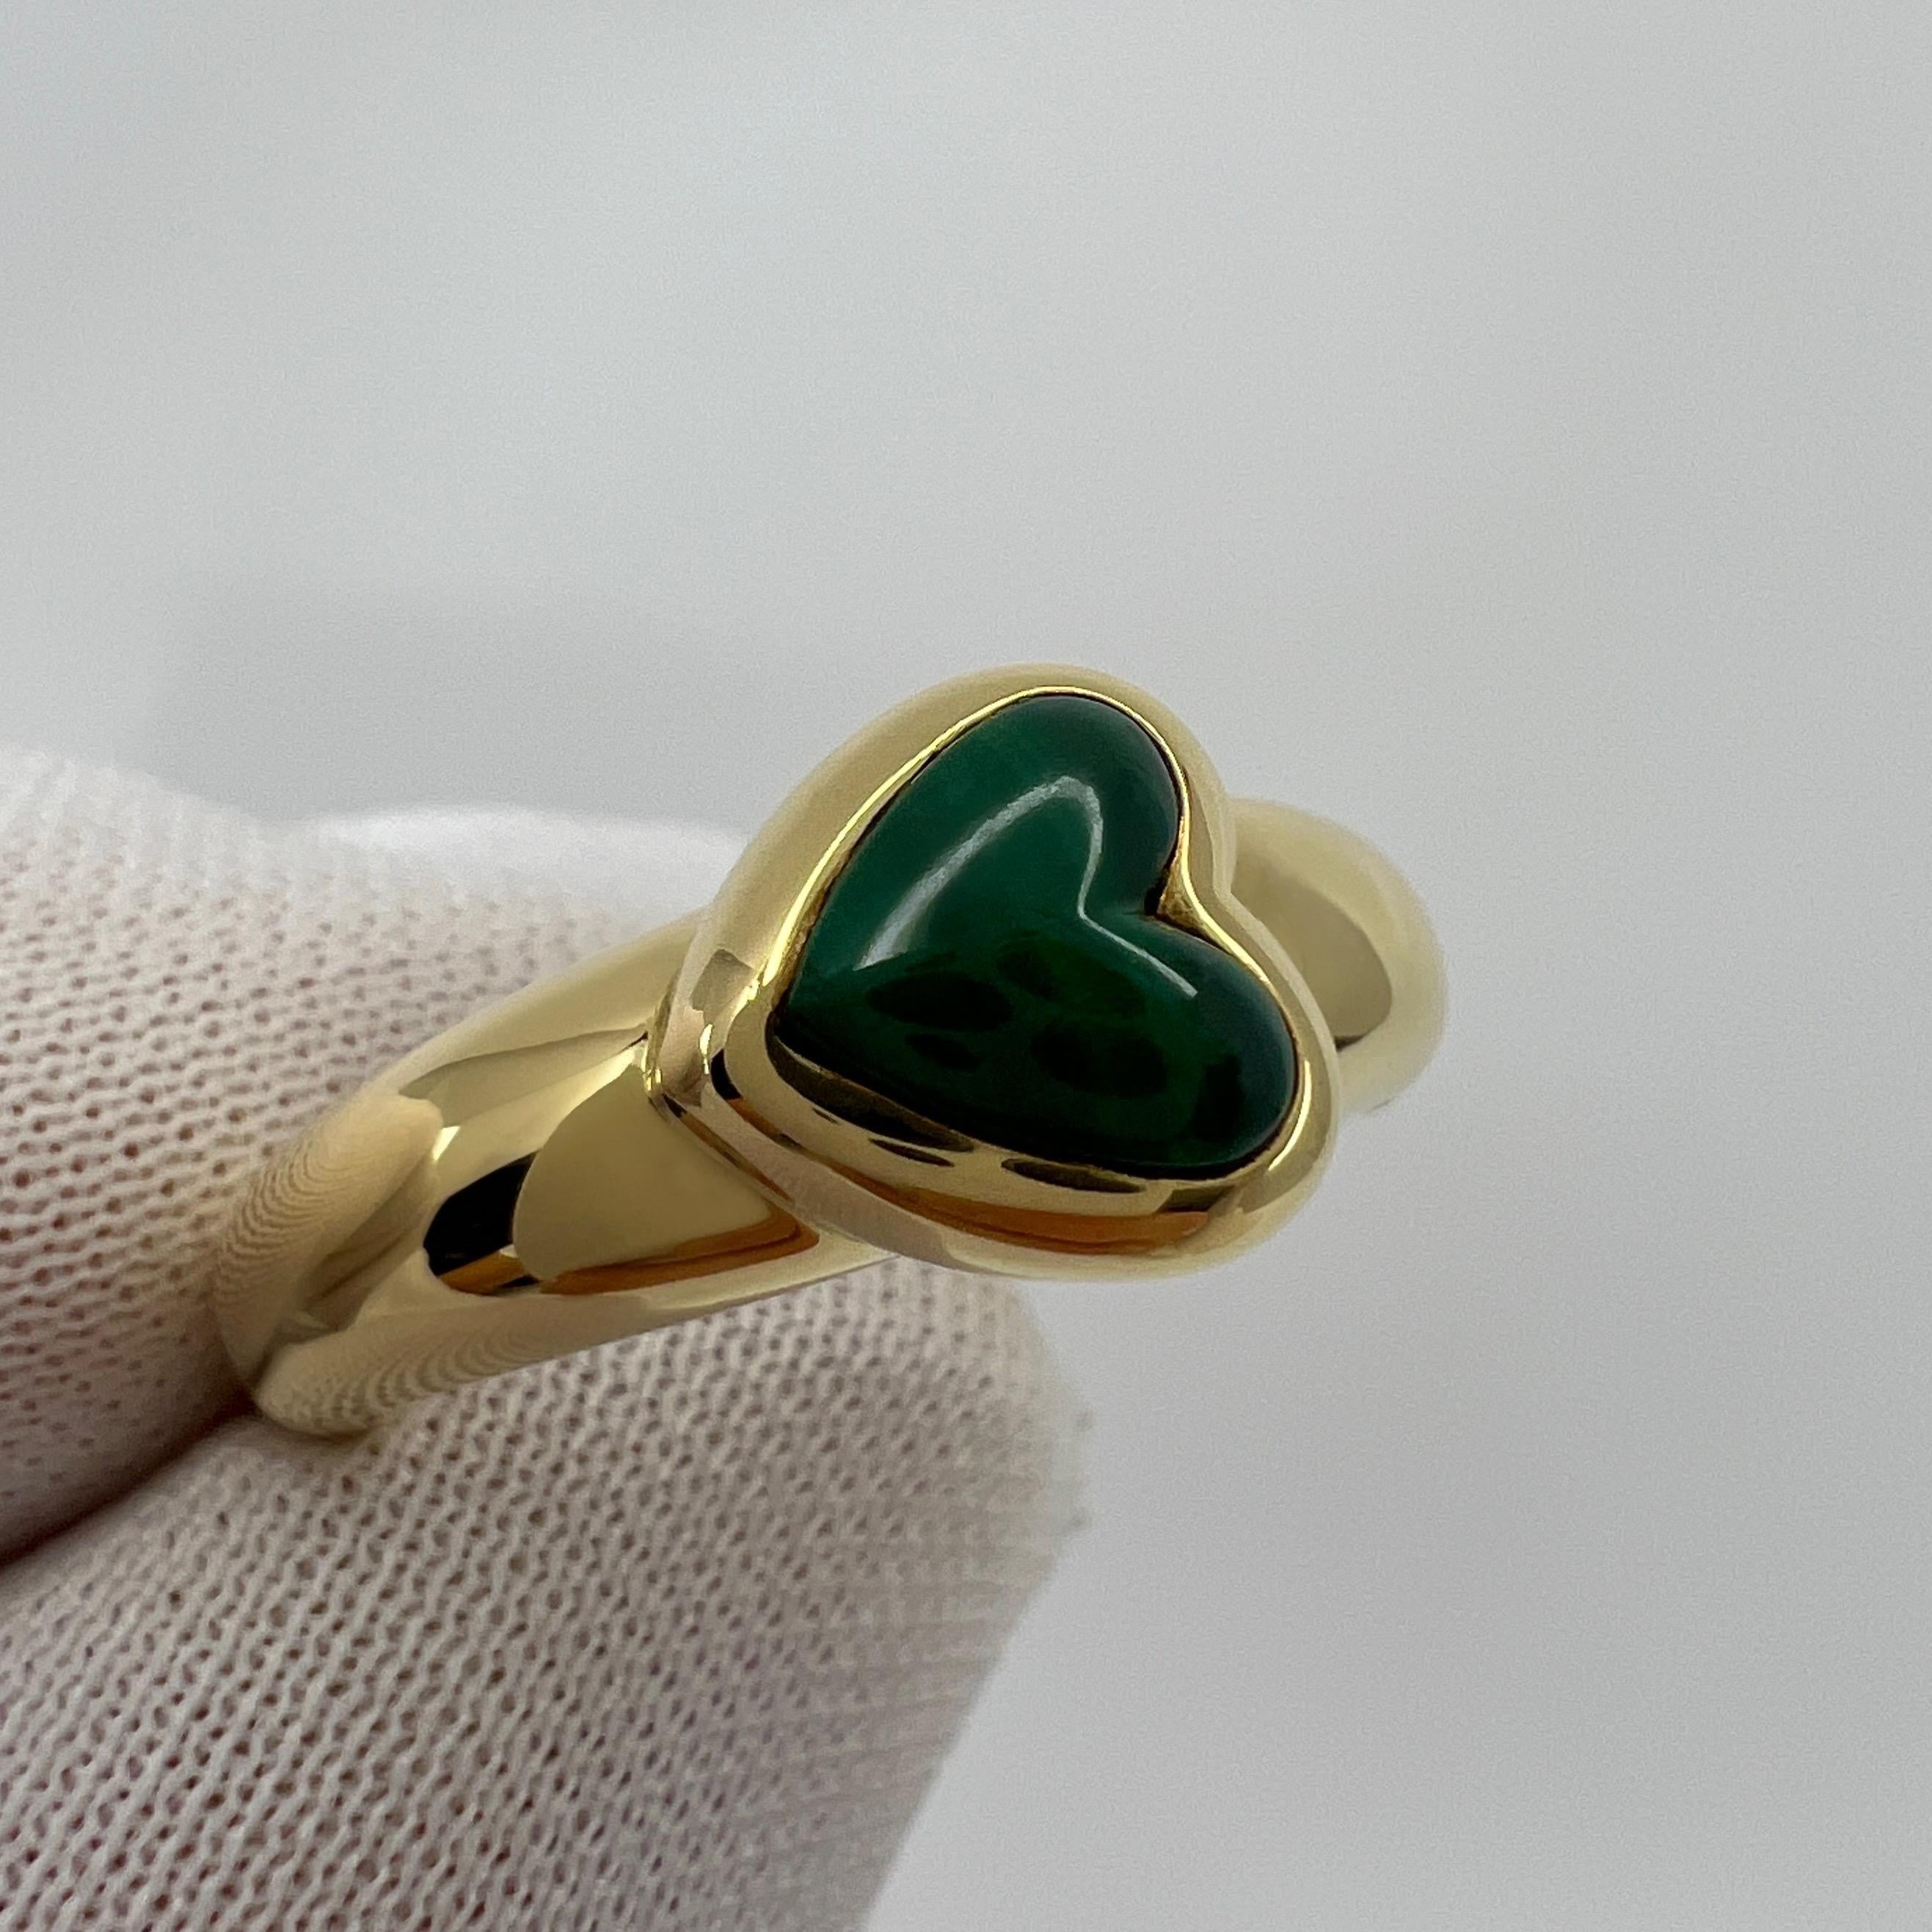 Rare Vintage Van Cleef & Arpels Green Malachite Heart Cut 18k Yellow Gold Ring.

A stunning vintage Van Cleef & Arpels ring with a beautiful top grade malachite gem displaying subtle colour banding and a beautiful heart cabochon cut.
A fine quality